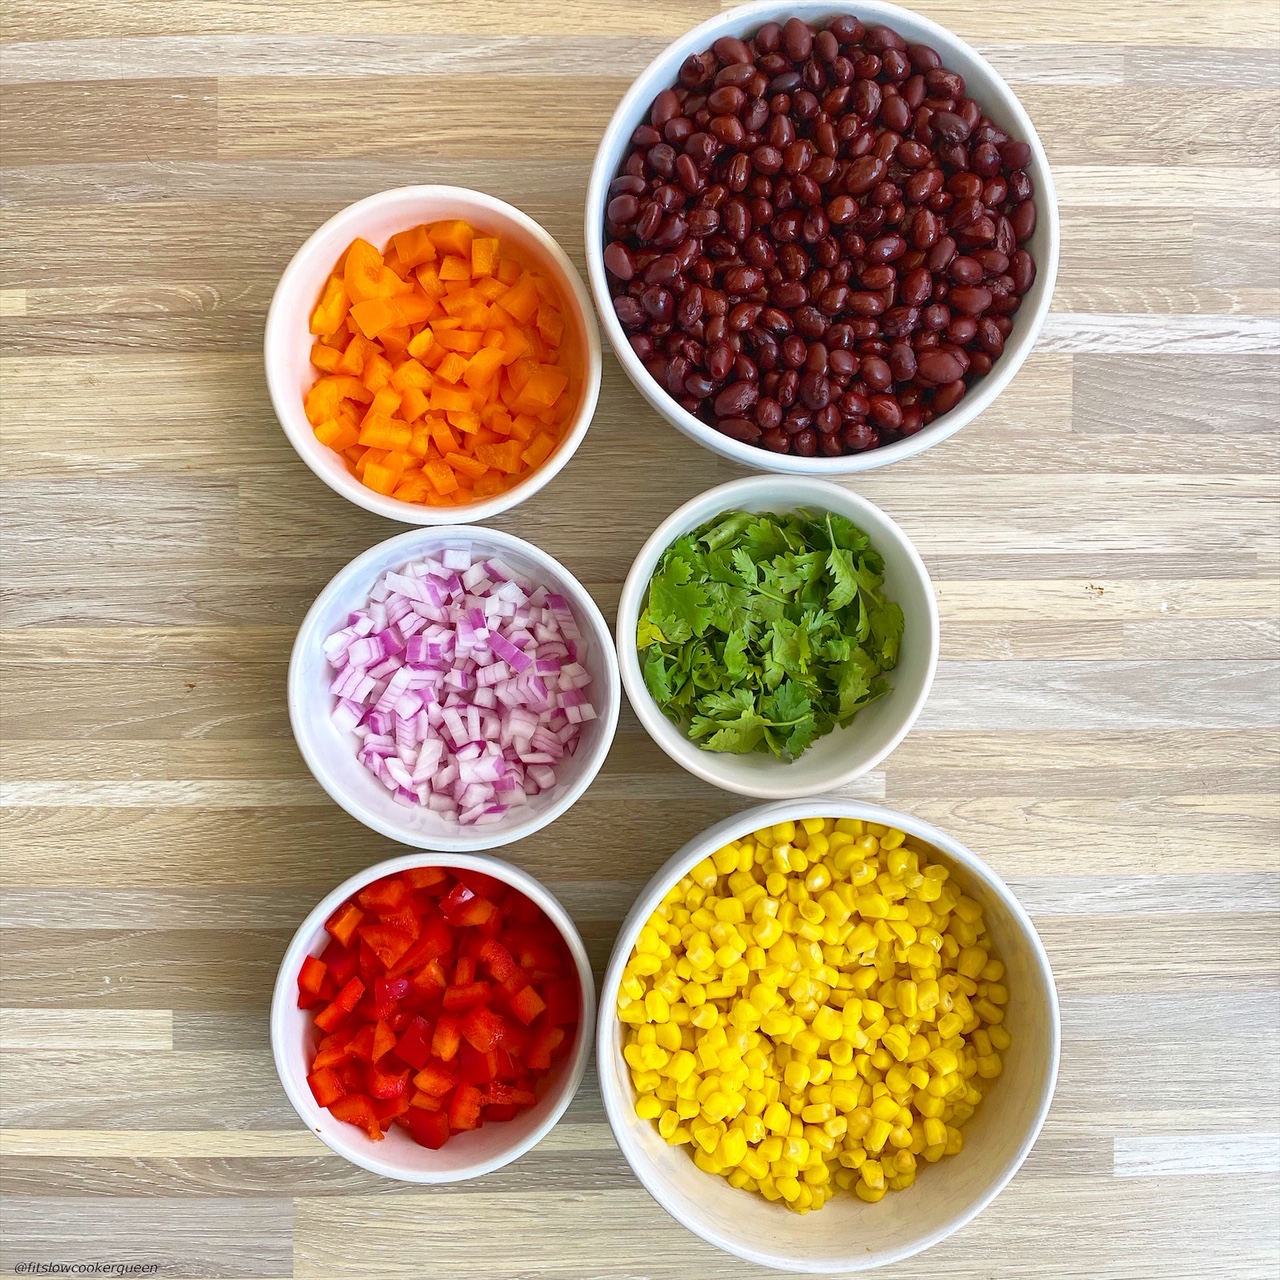 in separate bowls: black beans, corn, diced orange bell pepper, diced red bell pepper, red onion, fresh cilantro